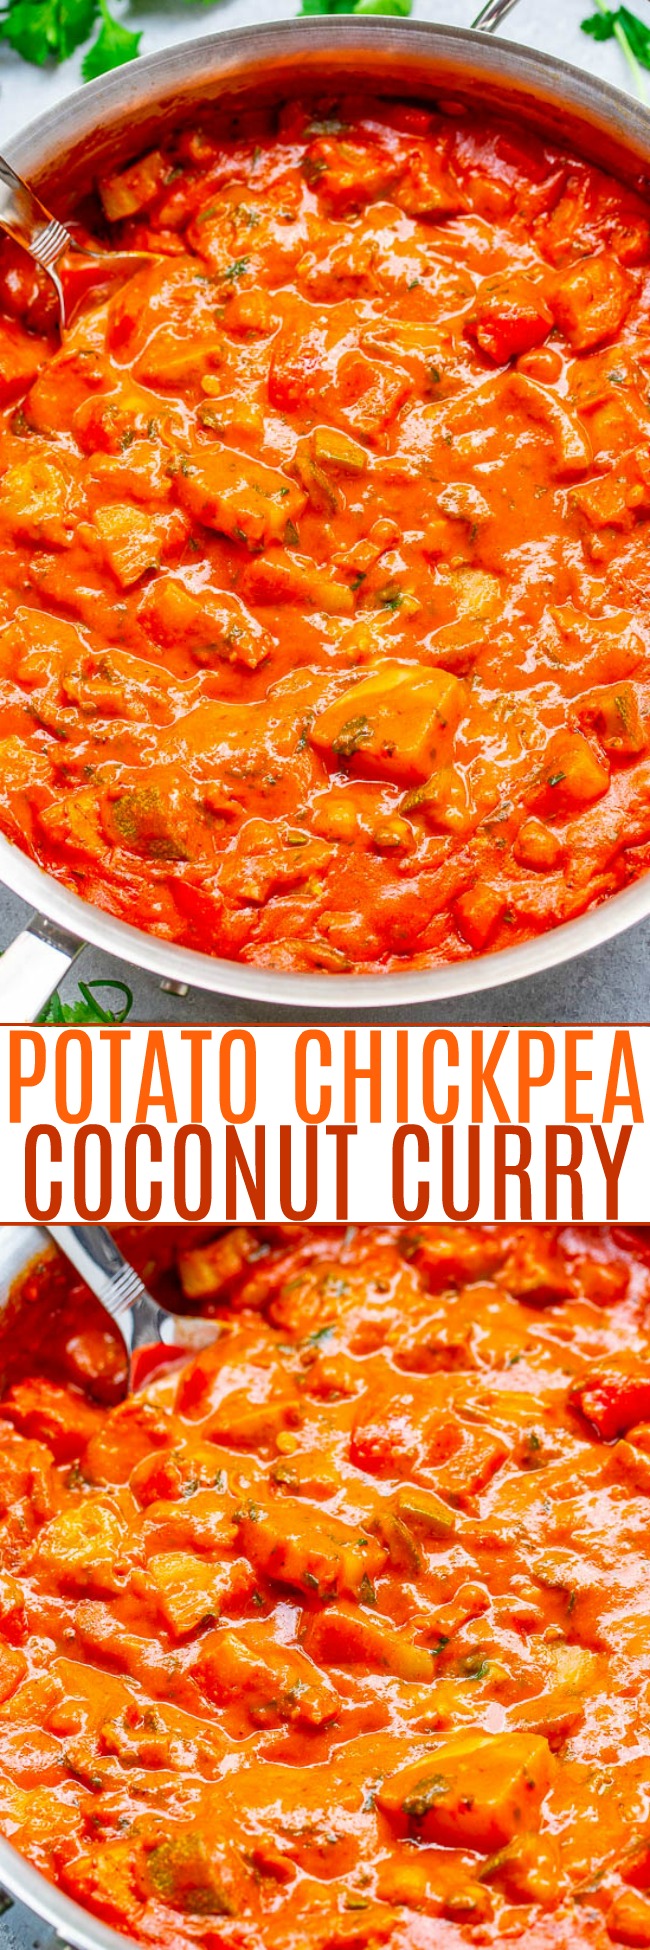 Potato Chickpea Coconut Curry - This vegan gluten-free curry is pure HEALTHY COMFORT FOOD with a fusion of Thai and Indian flavors!! Hearty, delicious, easy, ready in 30 minutes, and the leftovers freeze wonderfully!!